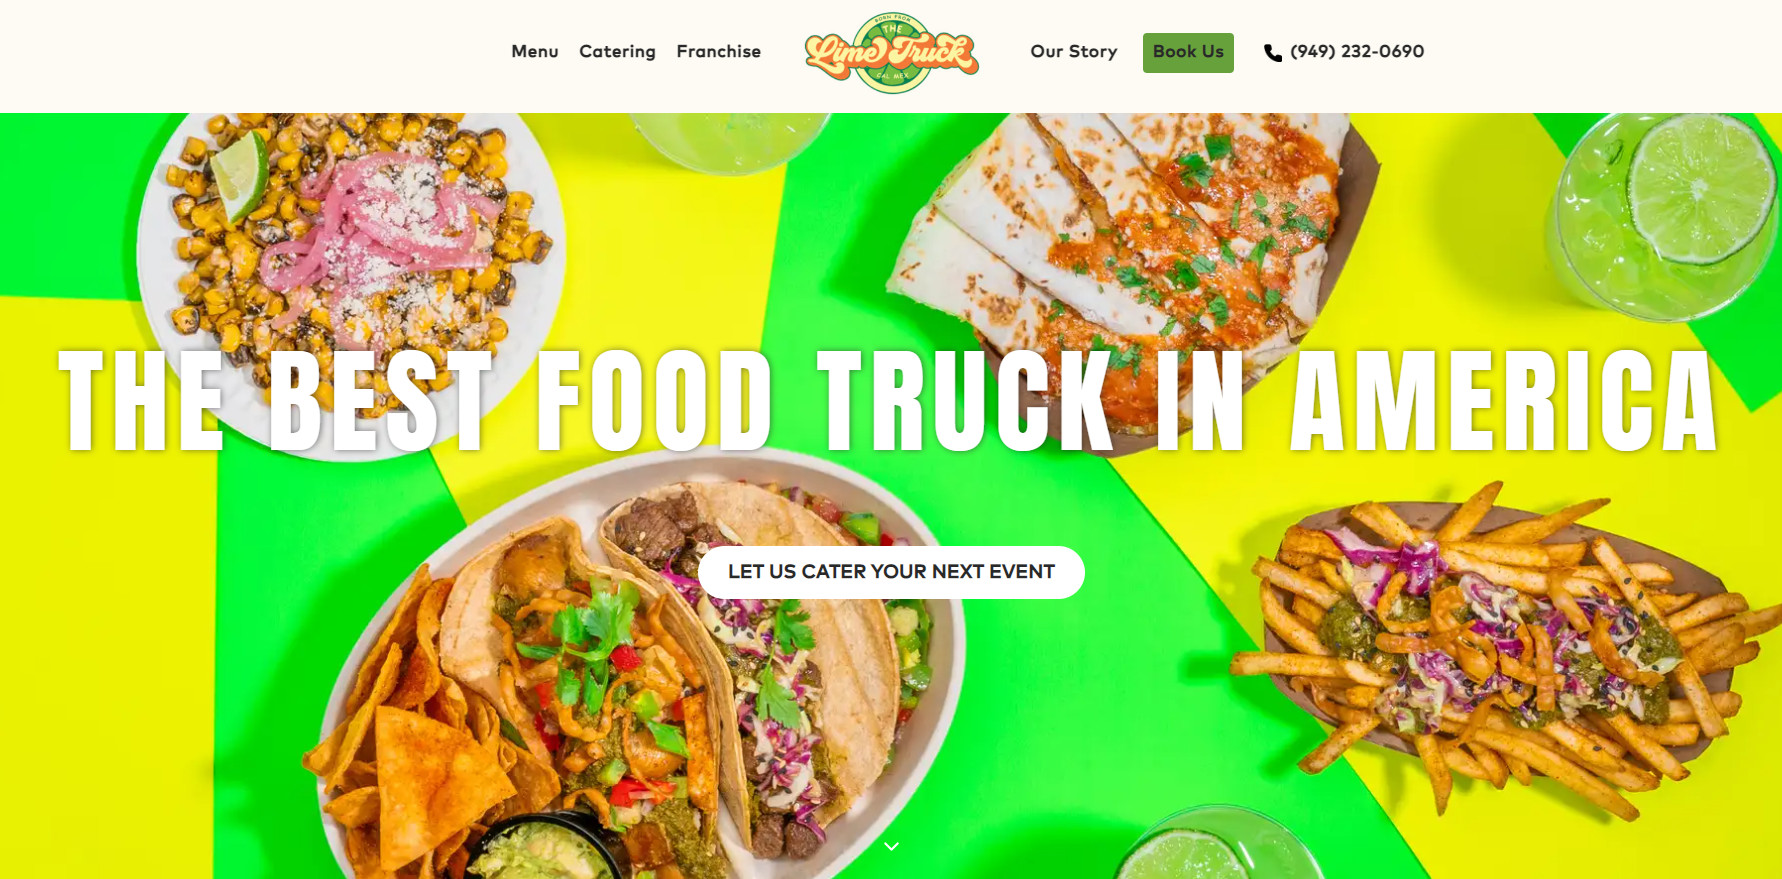 15 food truck websites example The Lime Truck